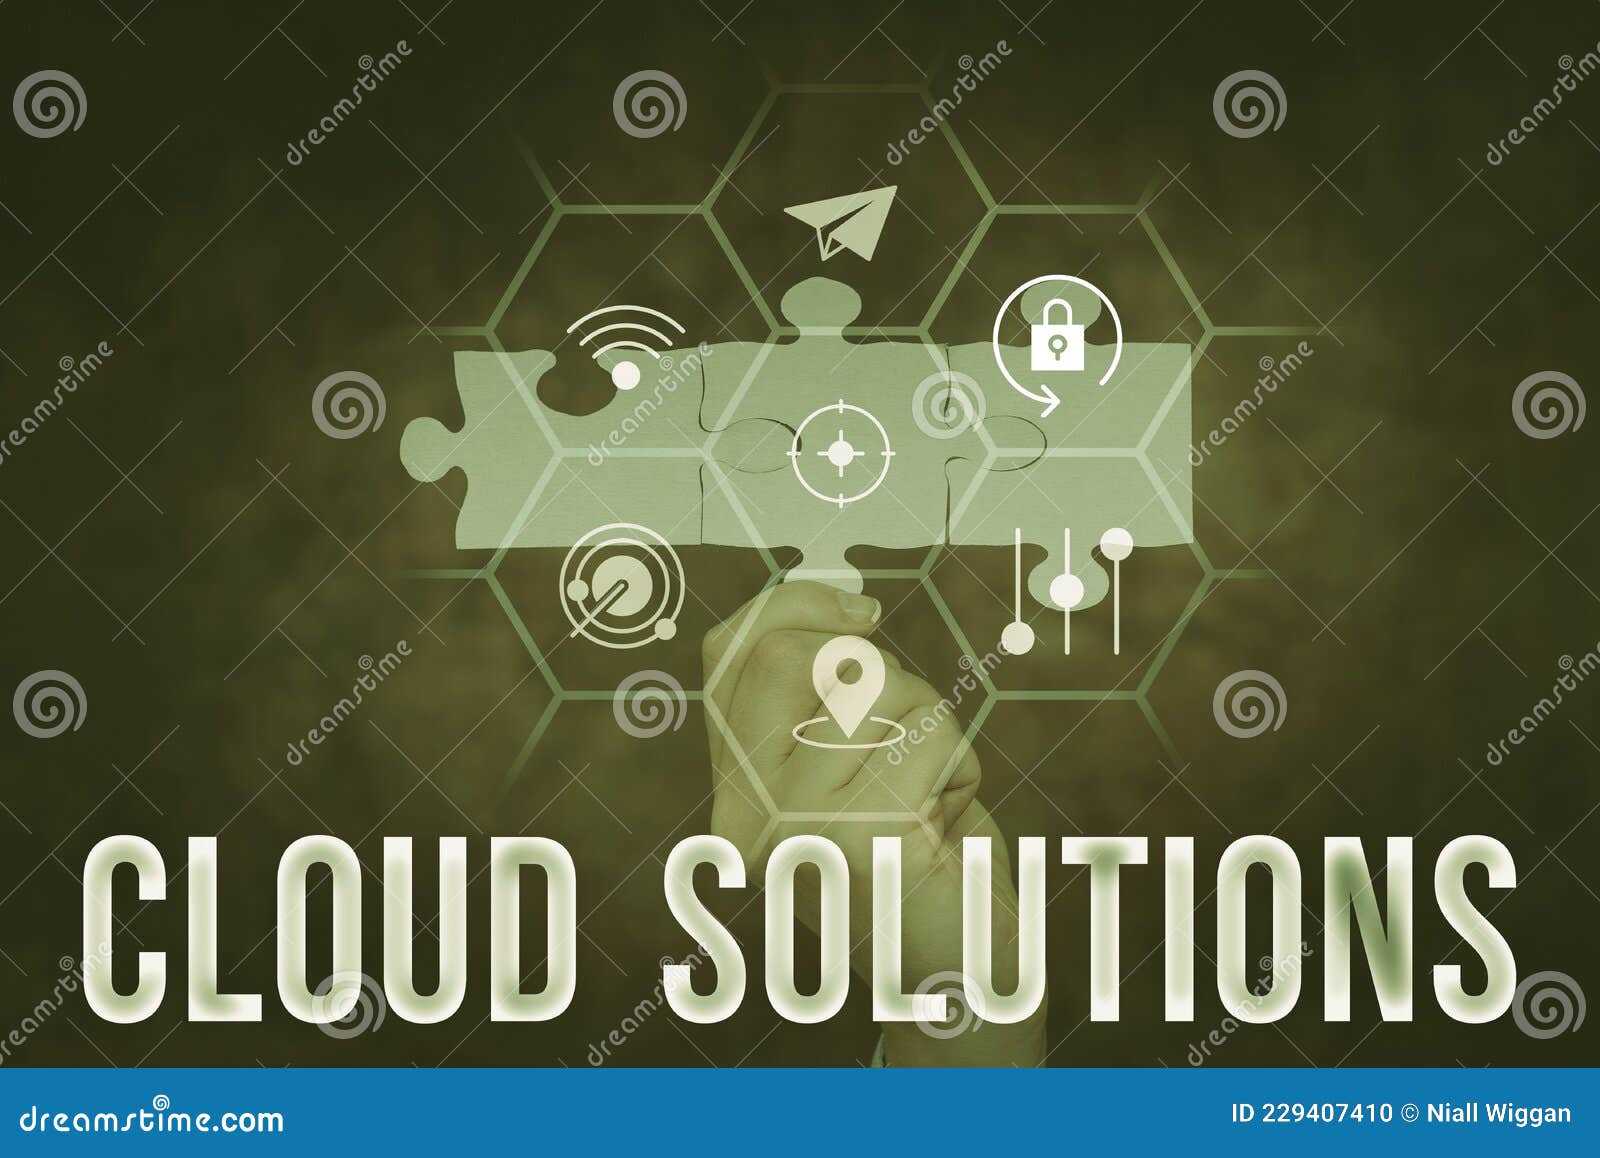 inspiration showing sign cloud solutions. word for ondemand services or resources accessed via the internet hand holding